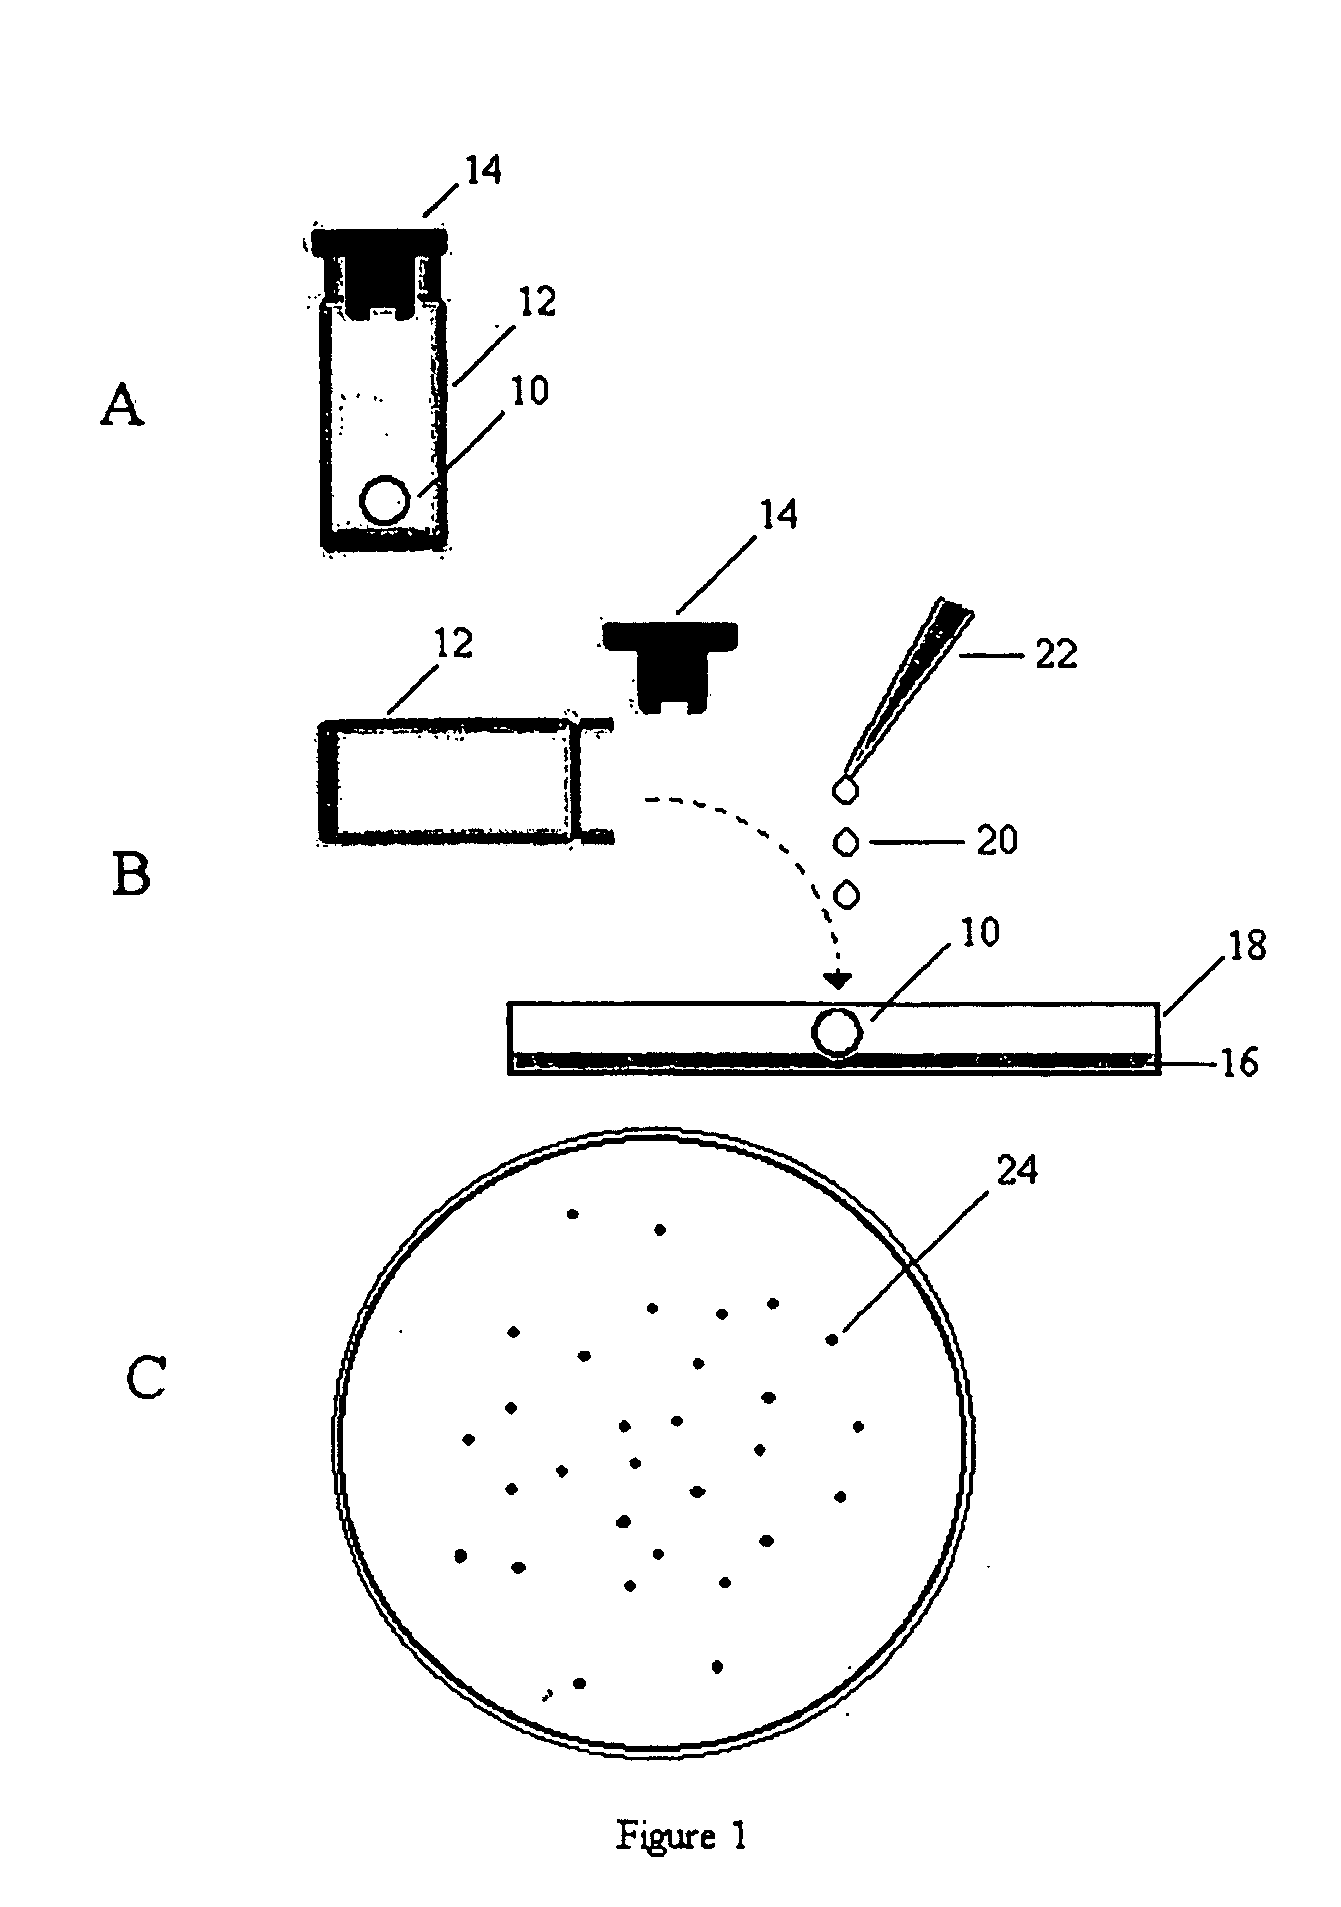 Products containing quantum of bioparticles and method for production thereof